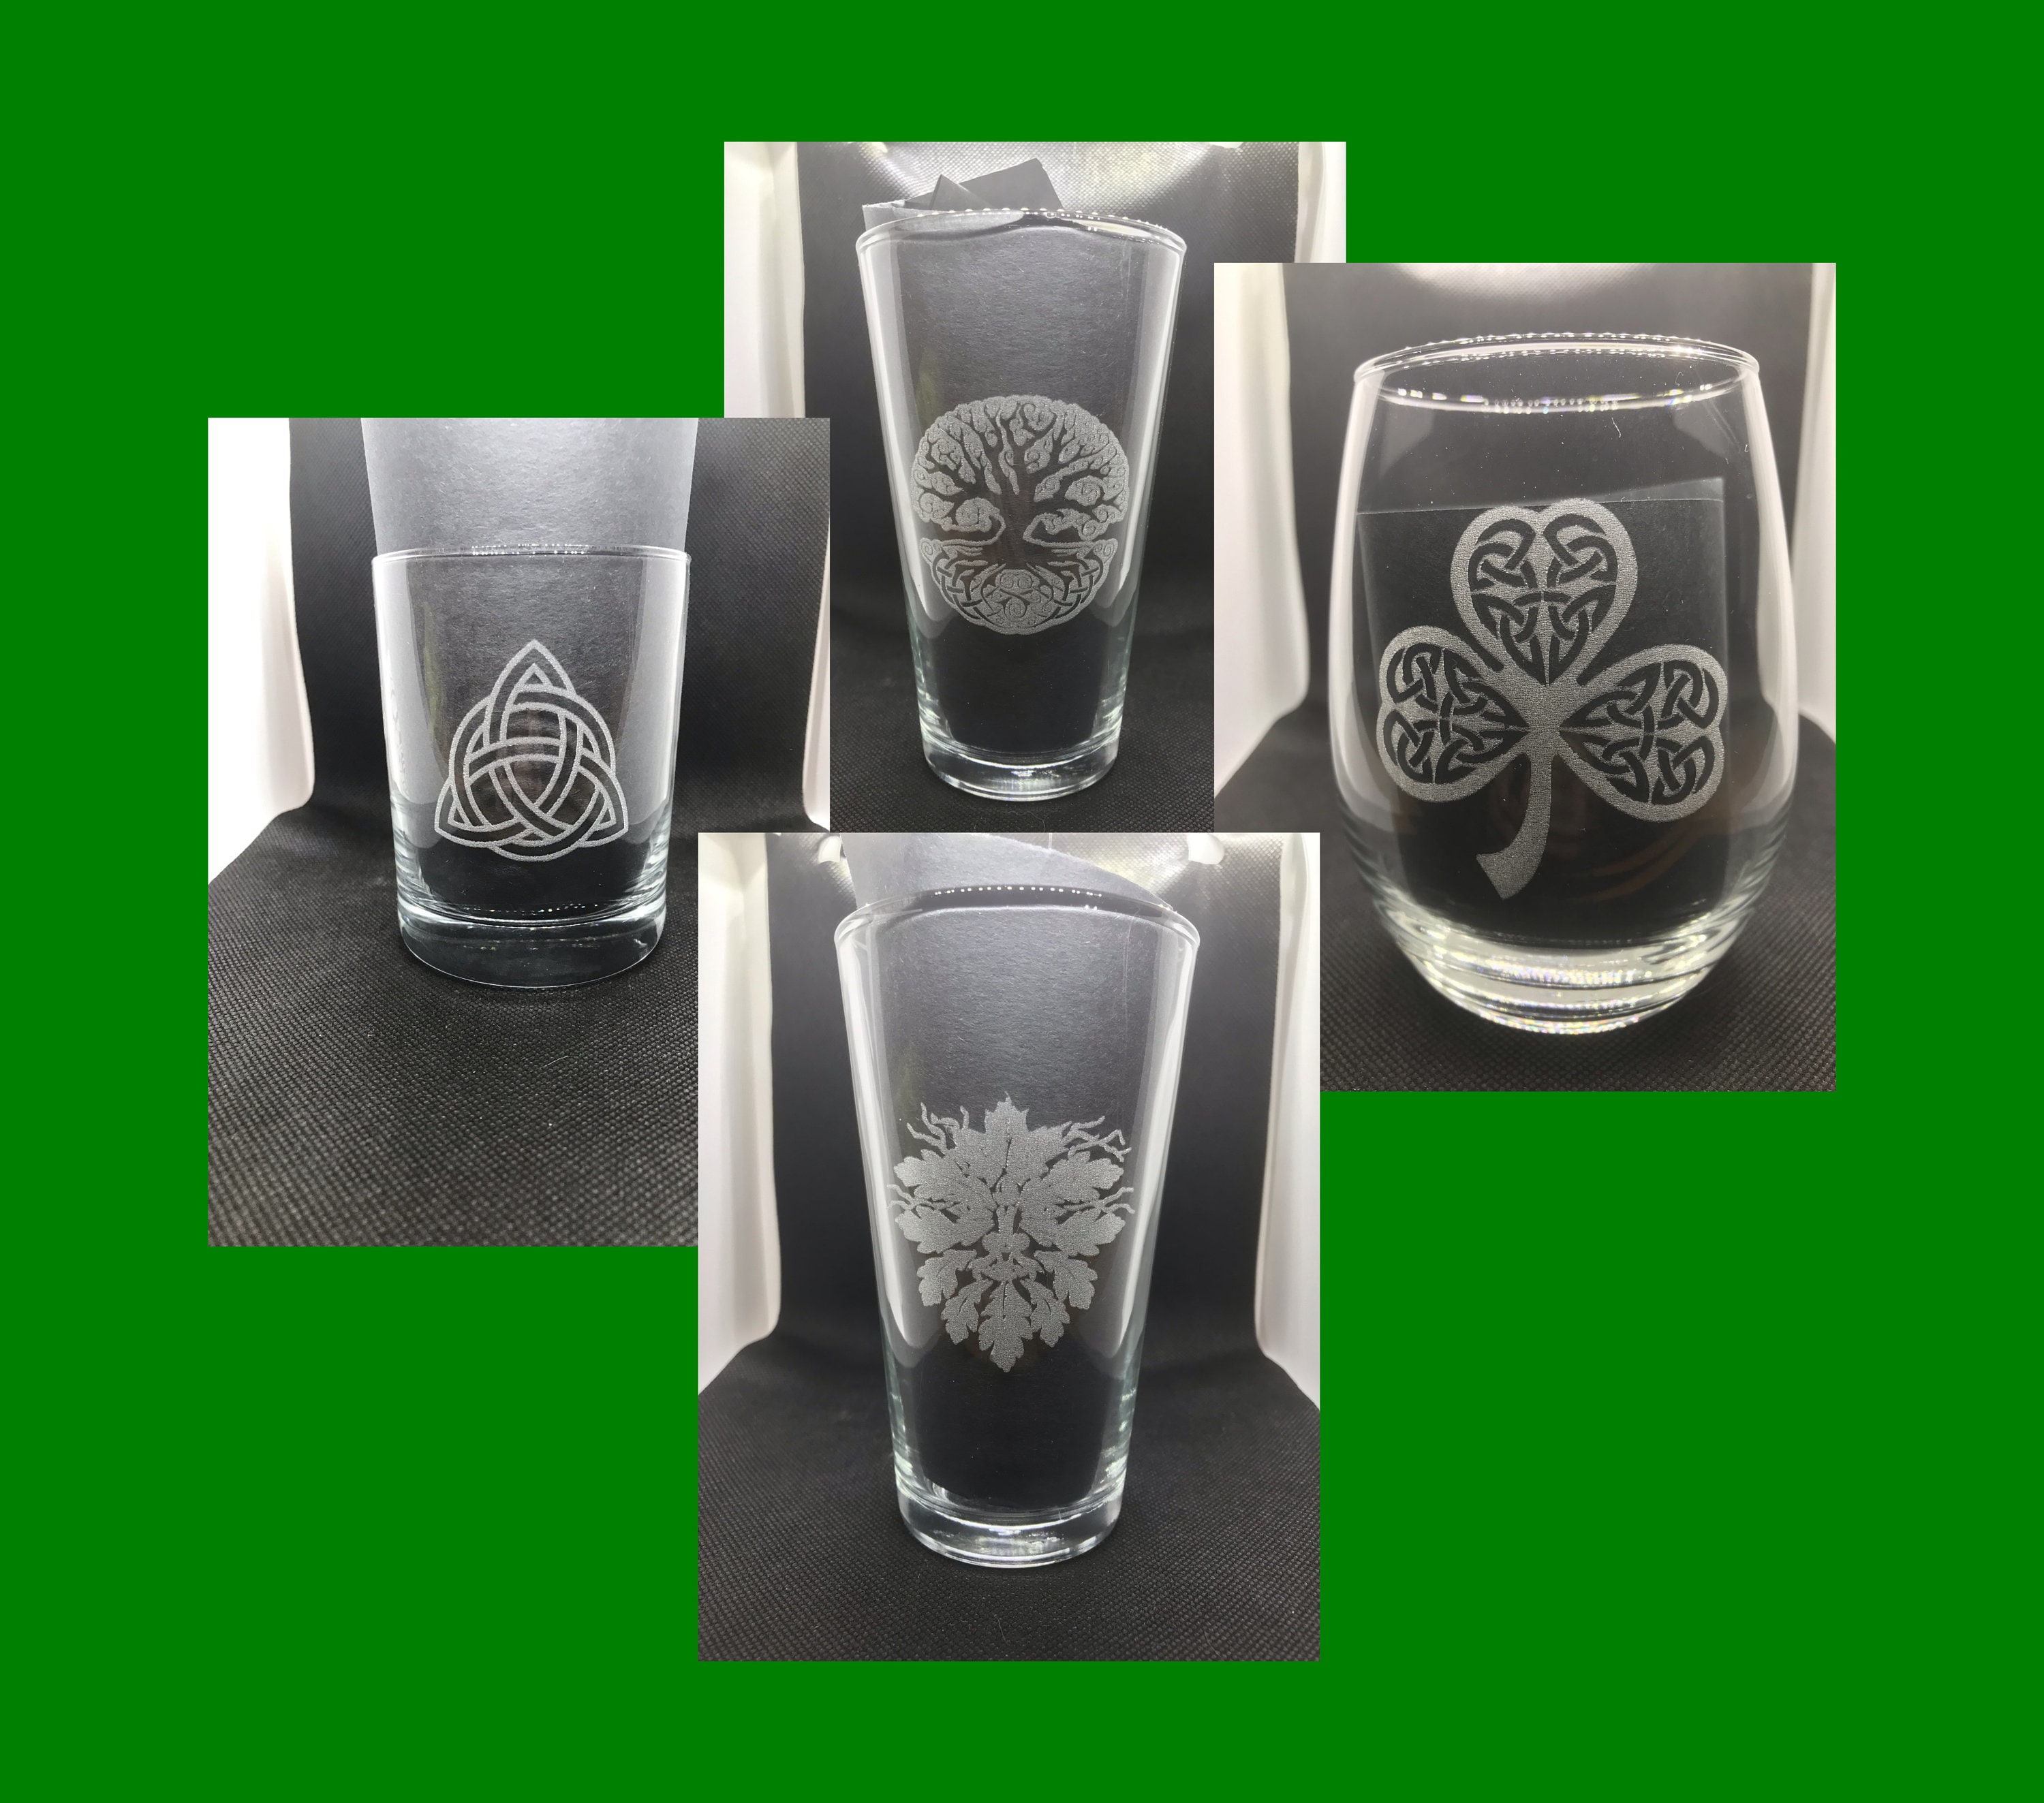 The Irish Set - 4 Different Pint Glasses - Set of 4 (Sand Etched)